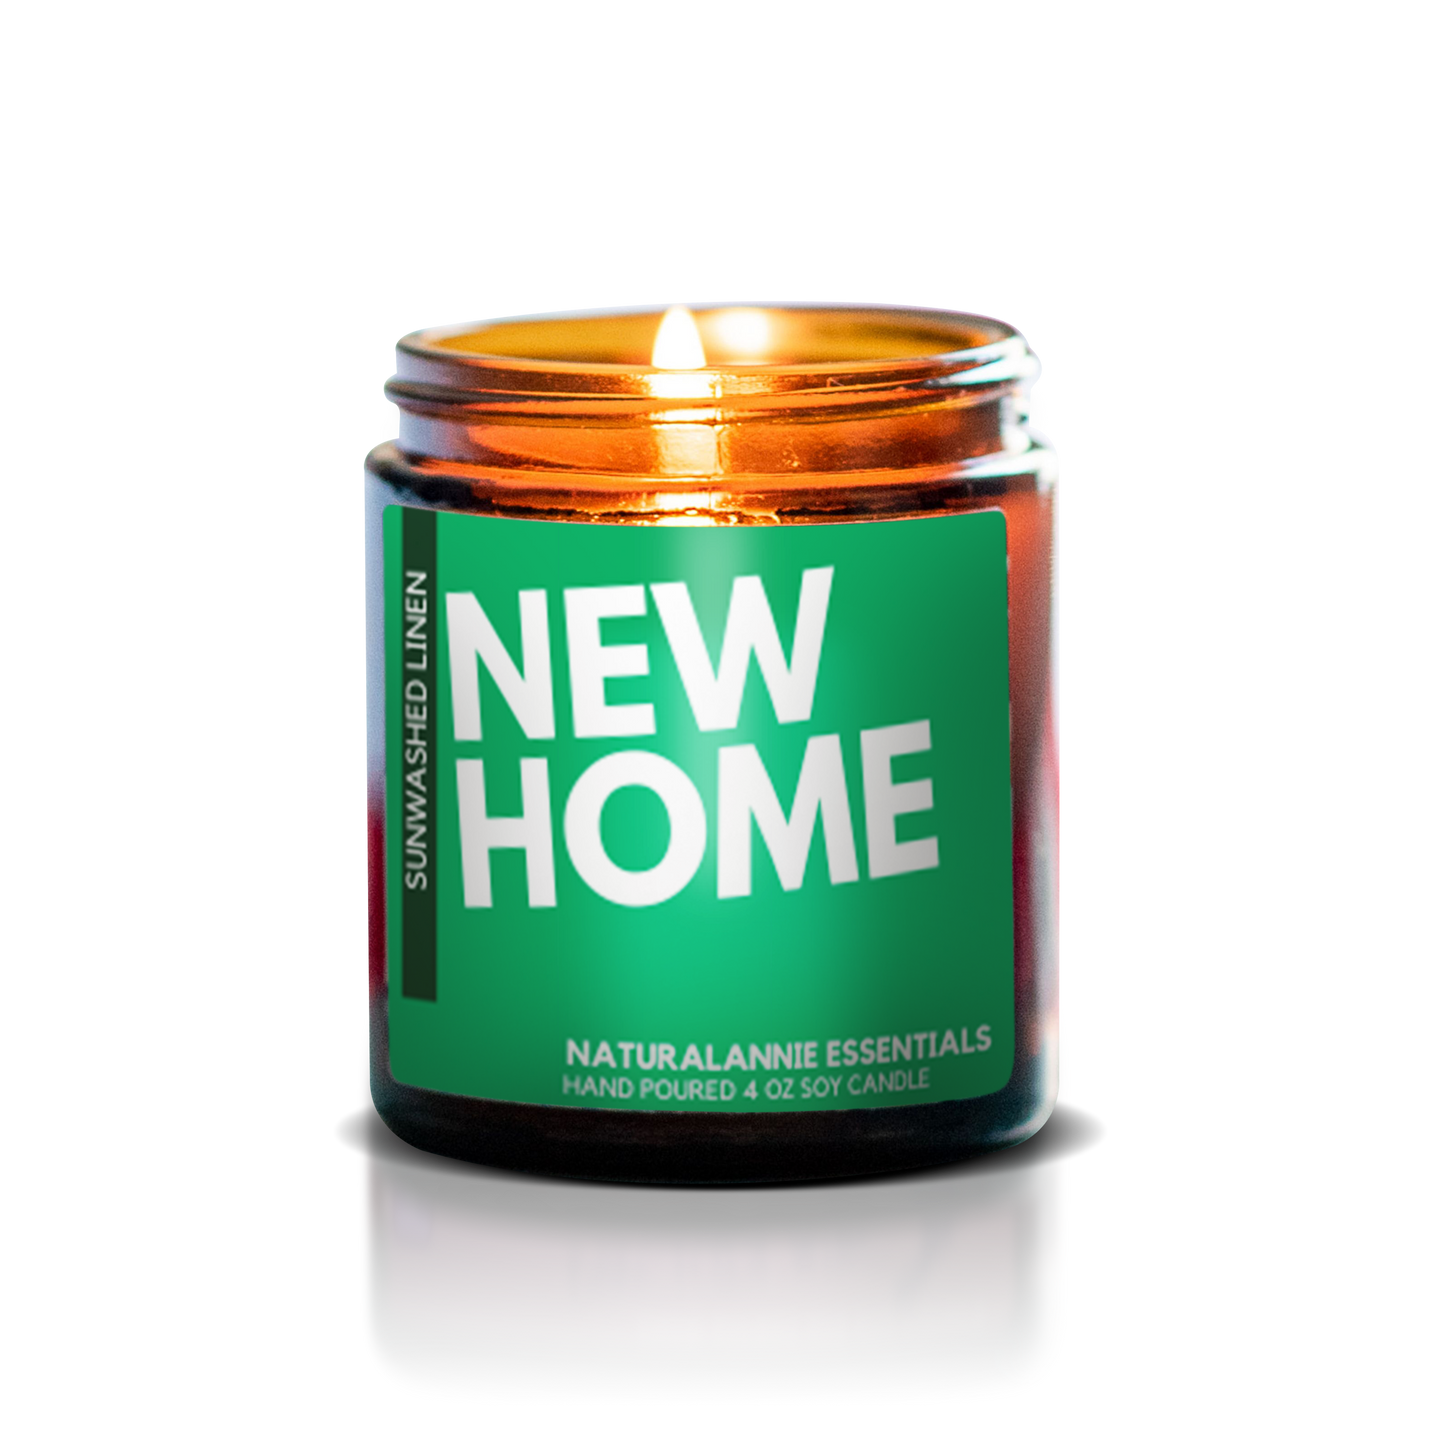 Sunwashed Linen "NEW HOME" Soy candle